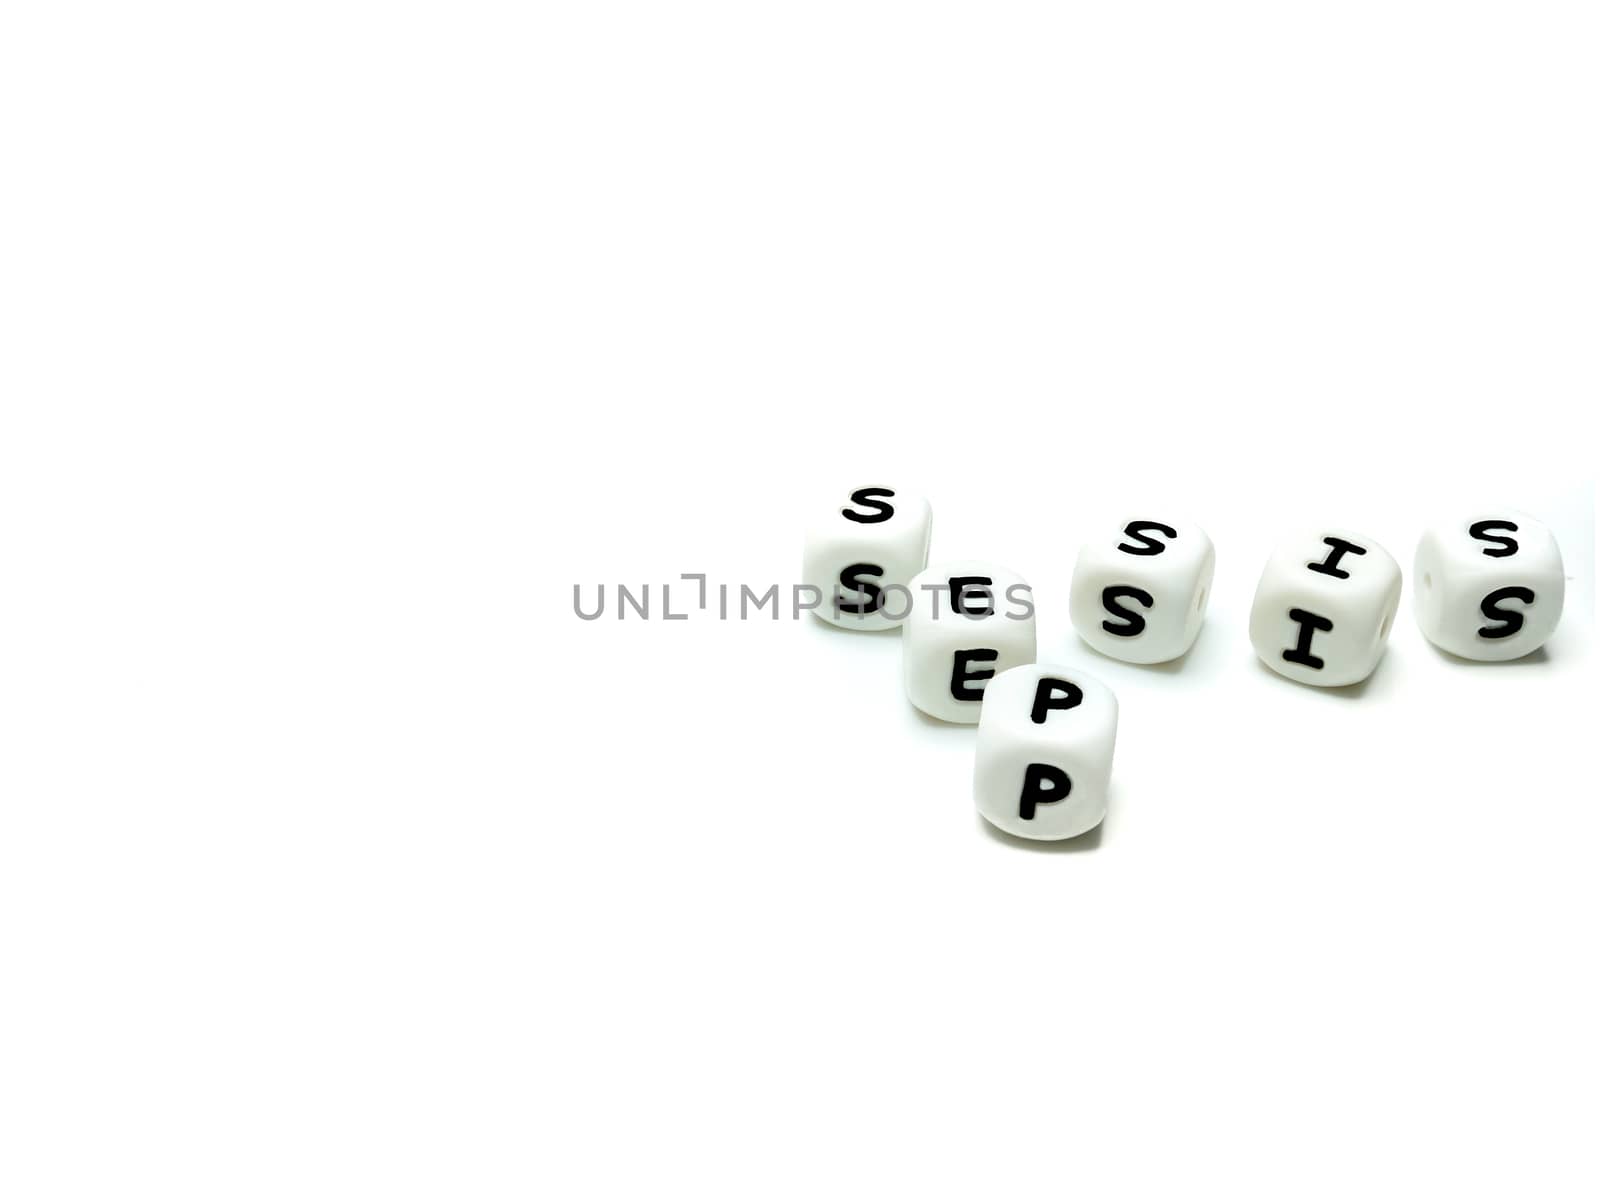 alphabet letters spelling sepsis, isolated on white background, sepsis awareness and prevention concepts